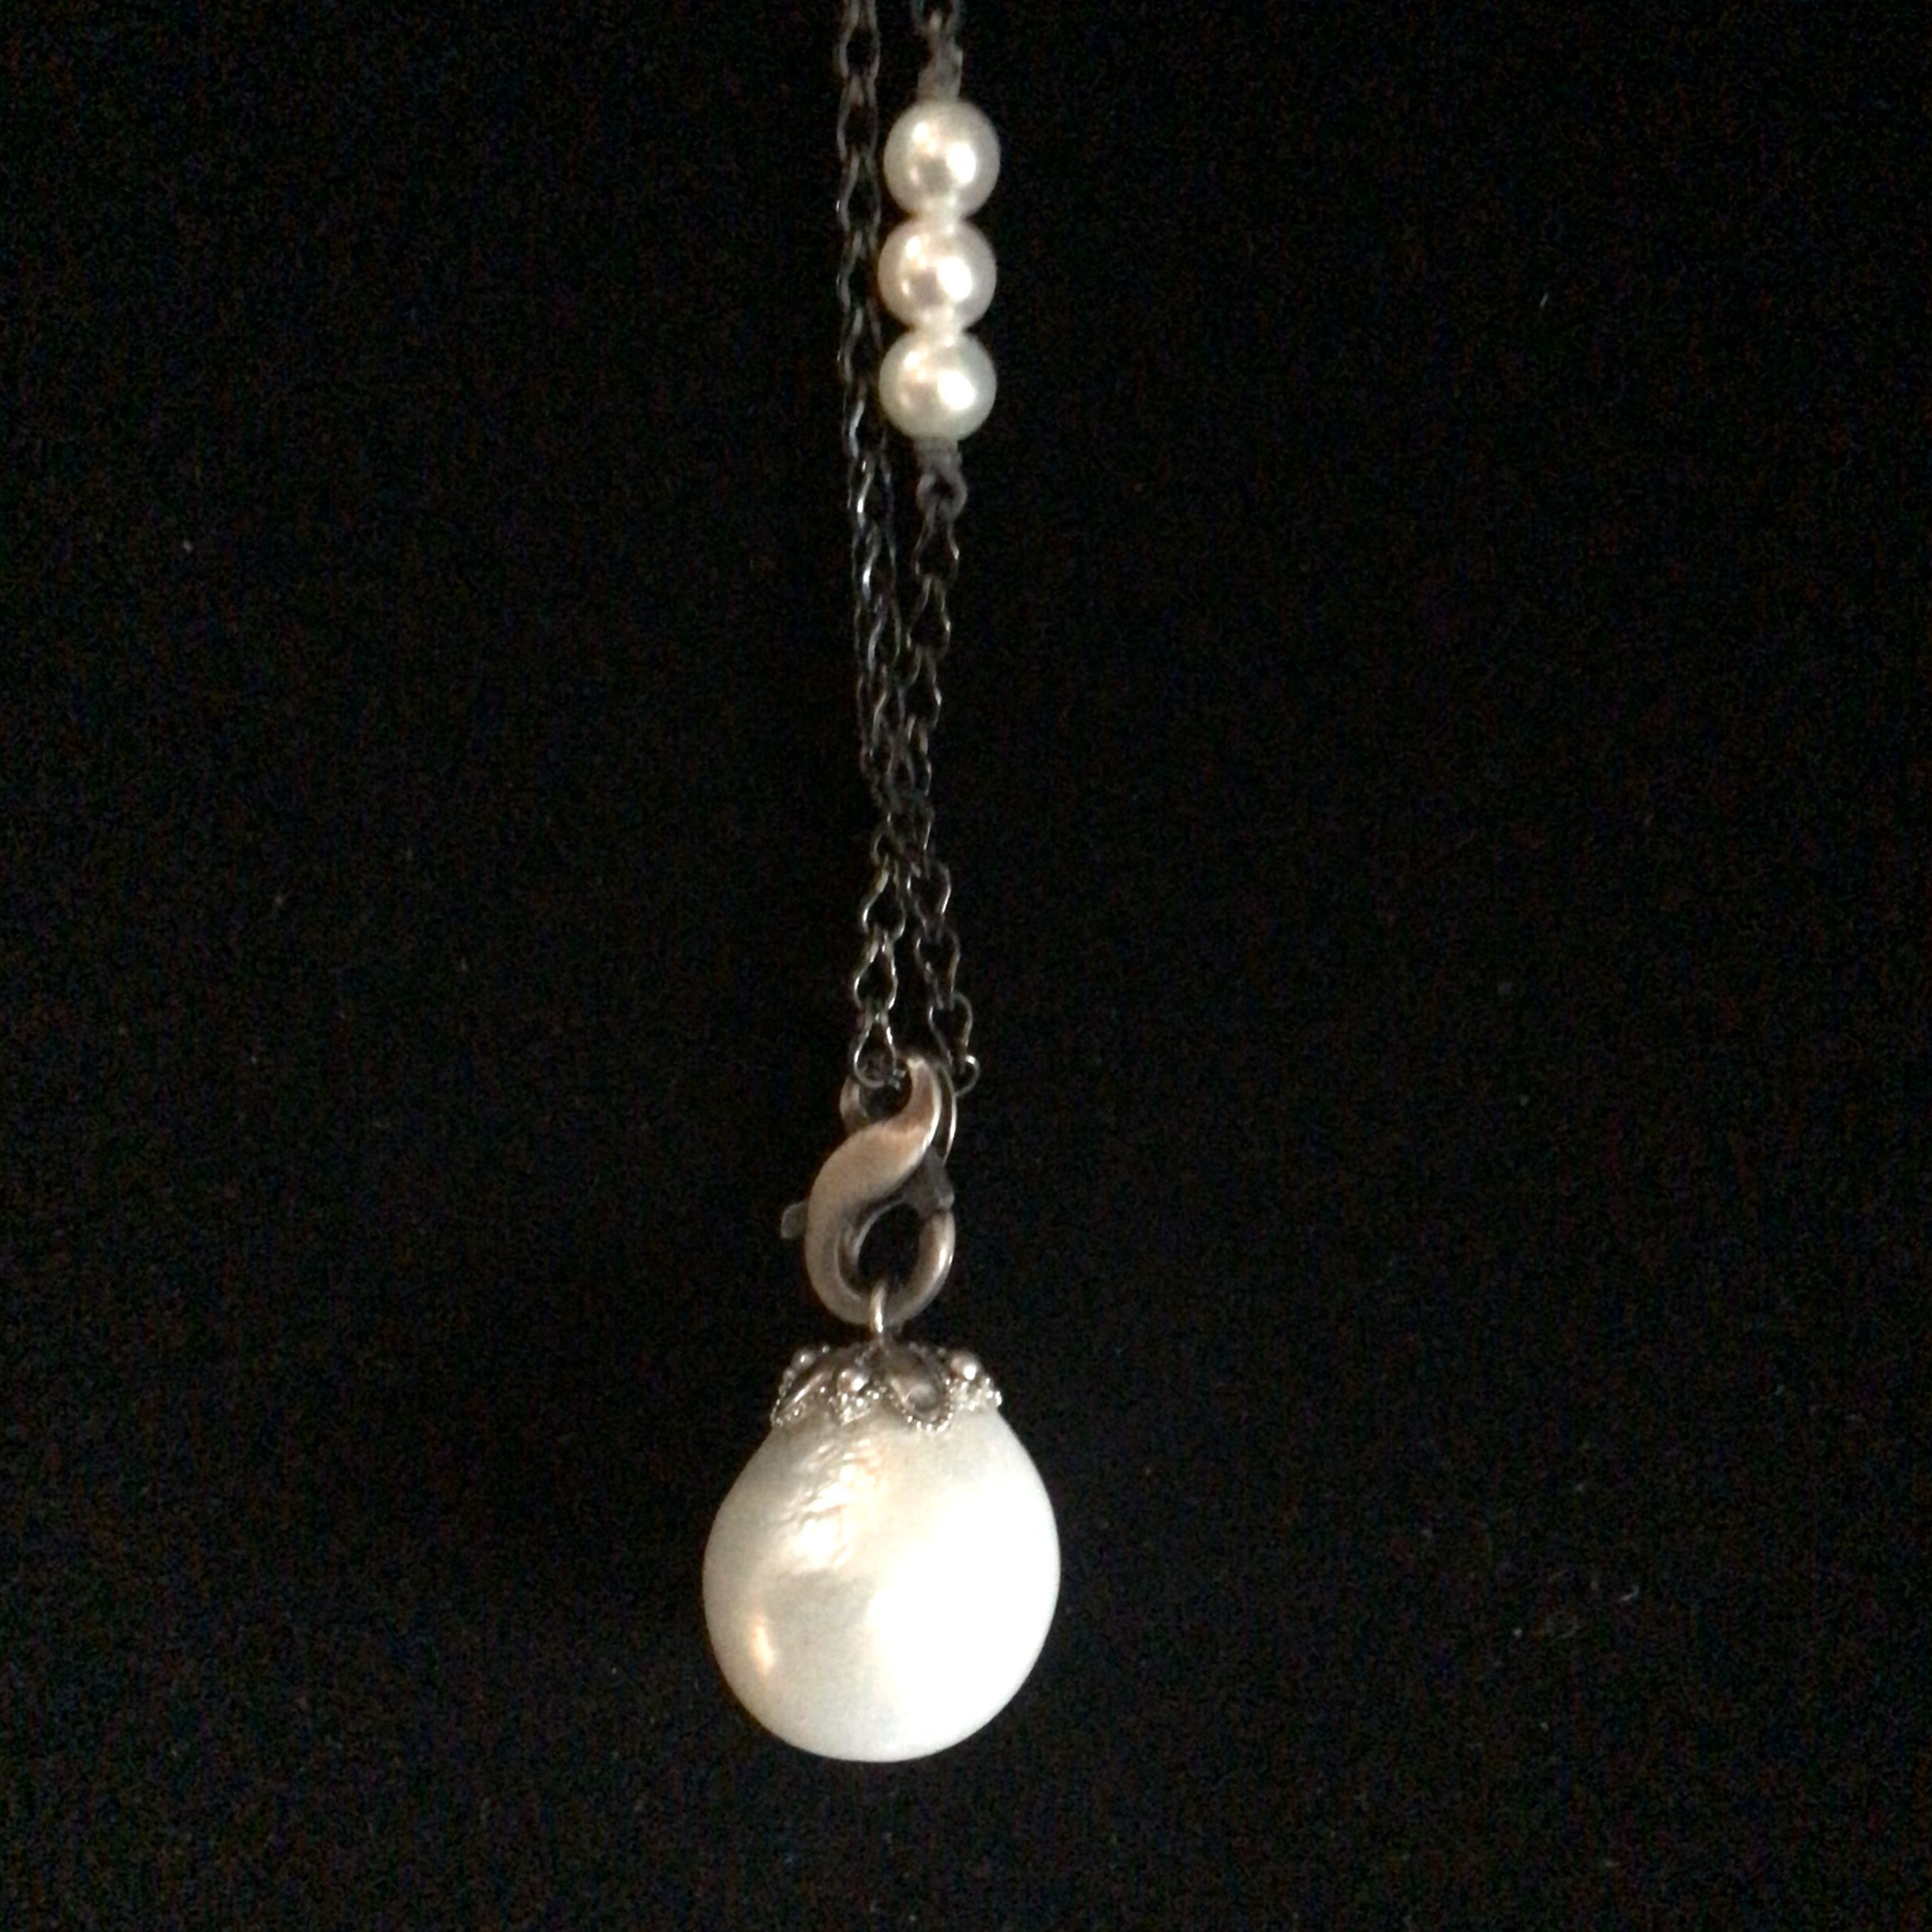 Pendant: Large White Edison Pearl with White Gold